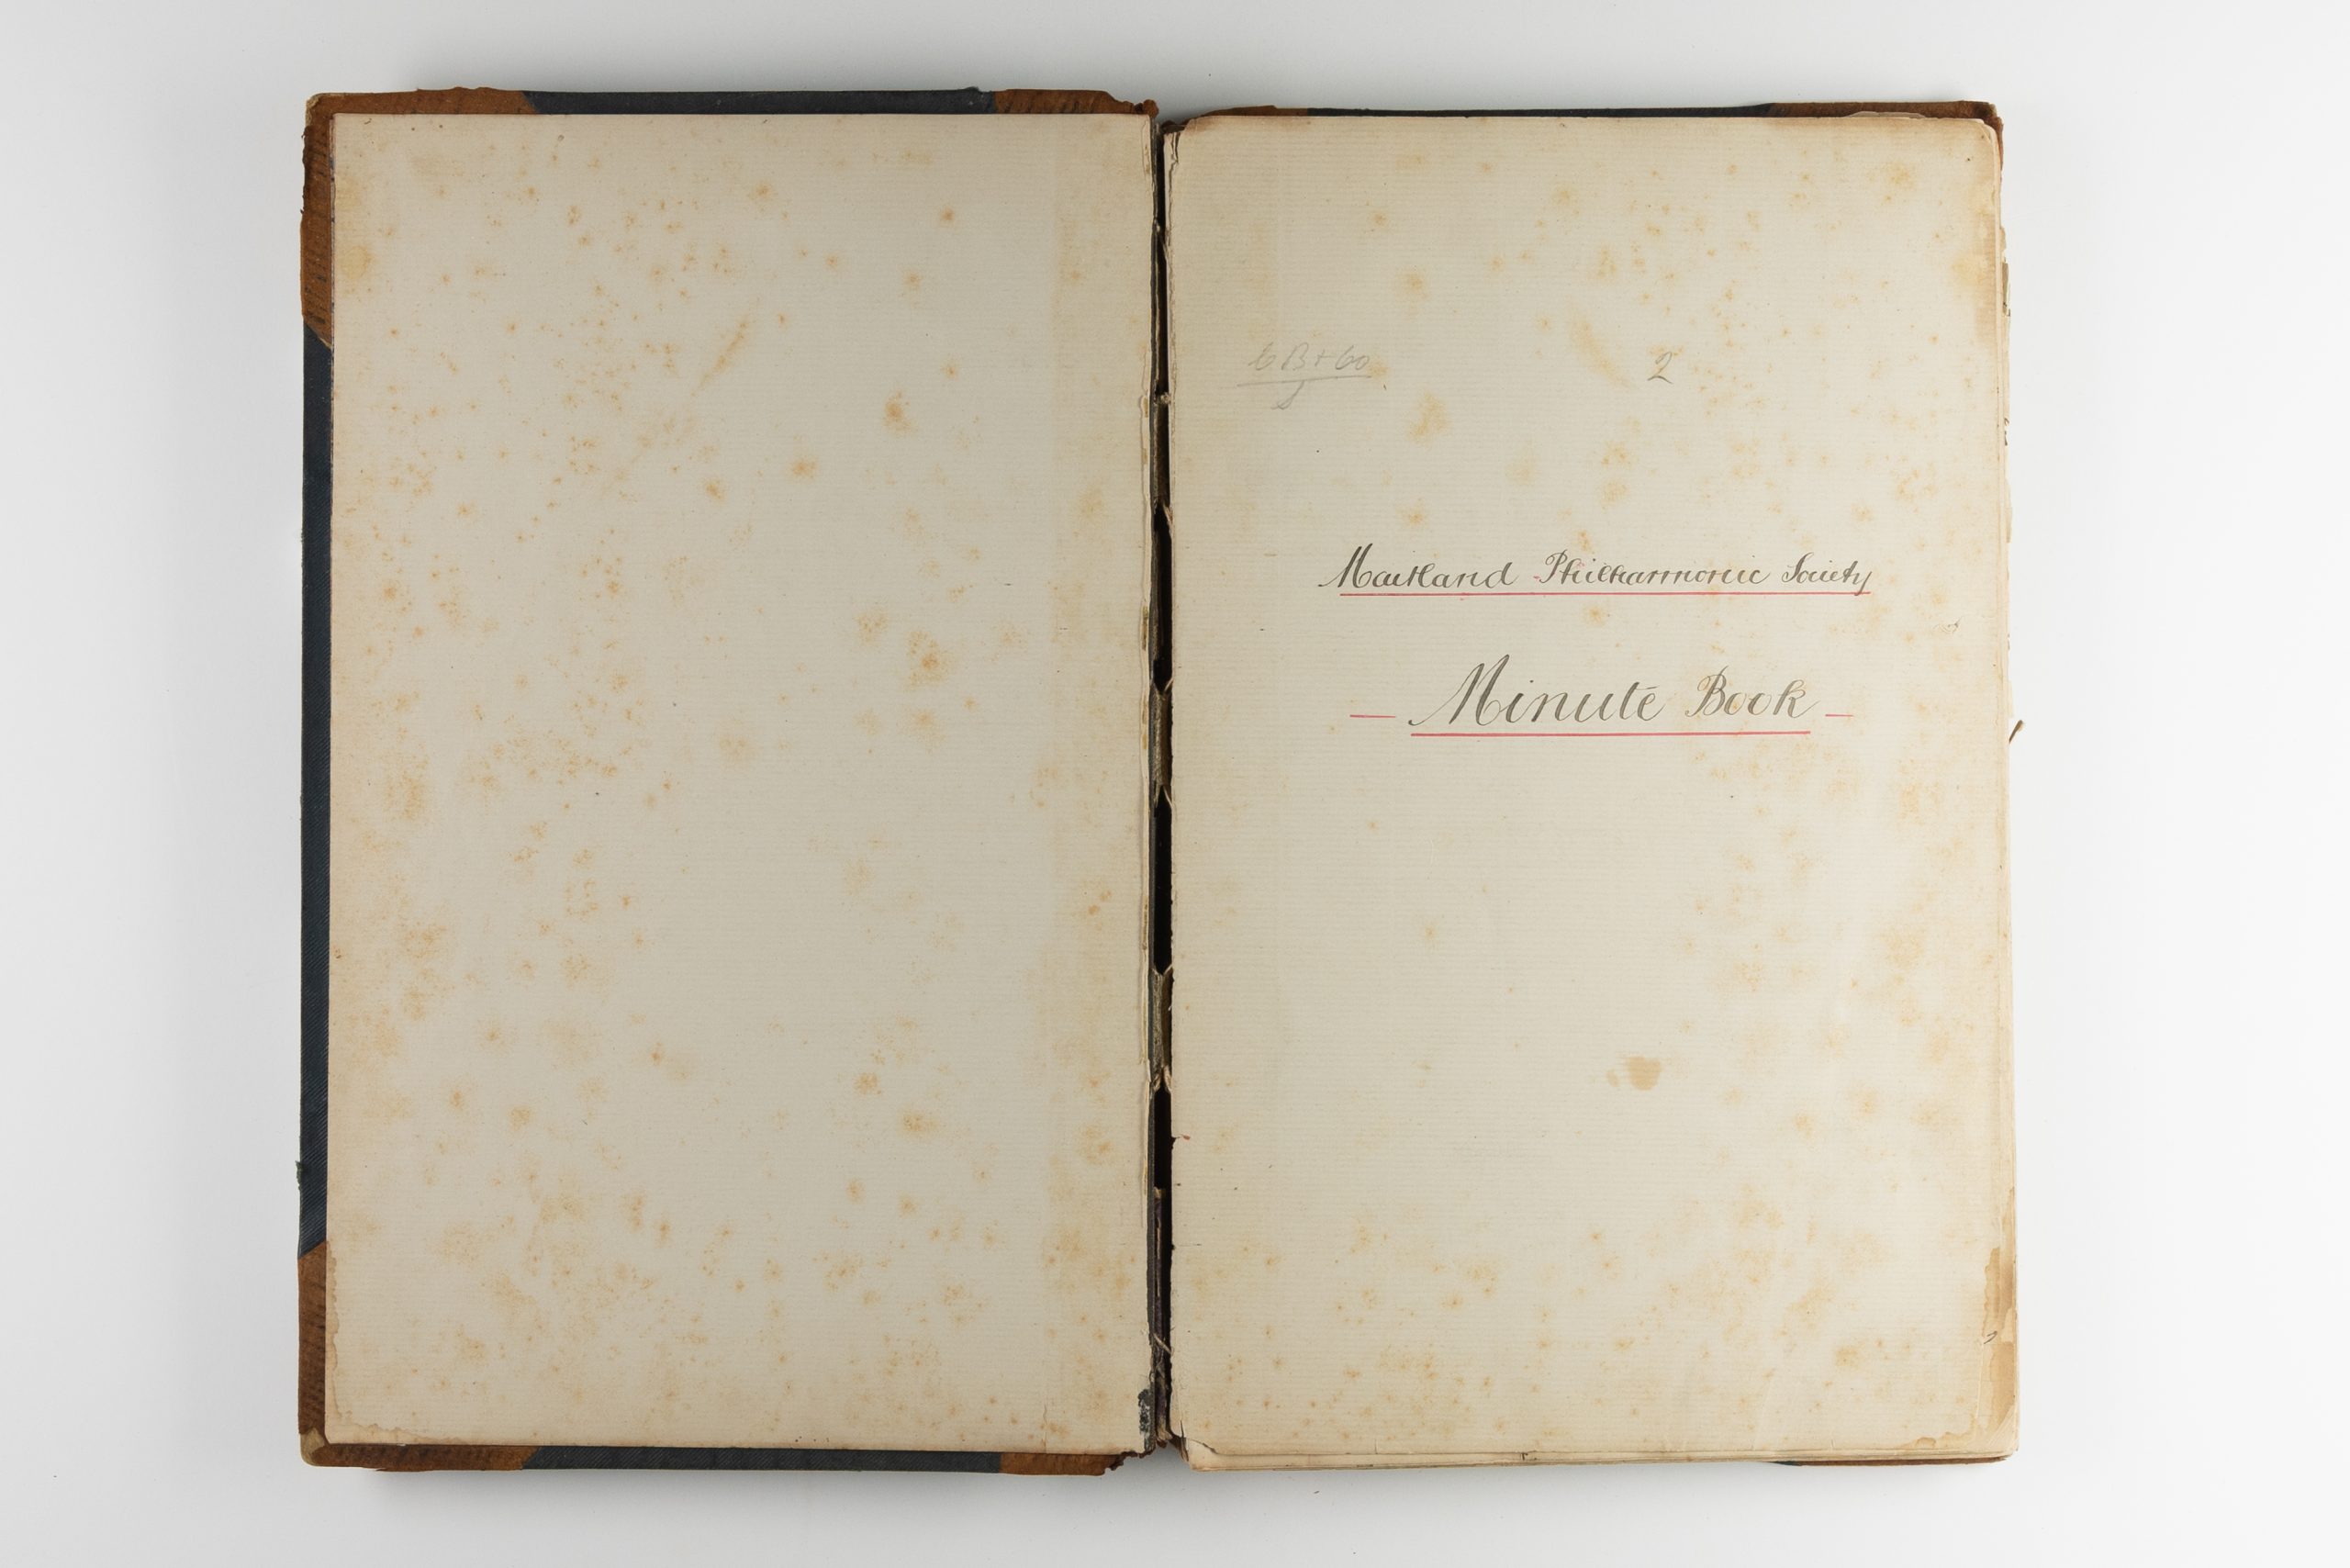 Open book with stained pages, this is the title page which reads, in handwritten cursive: "Maitland Philharmonic Society Minute Book"